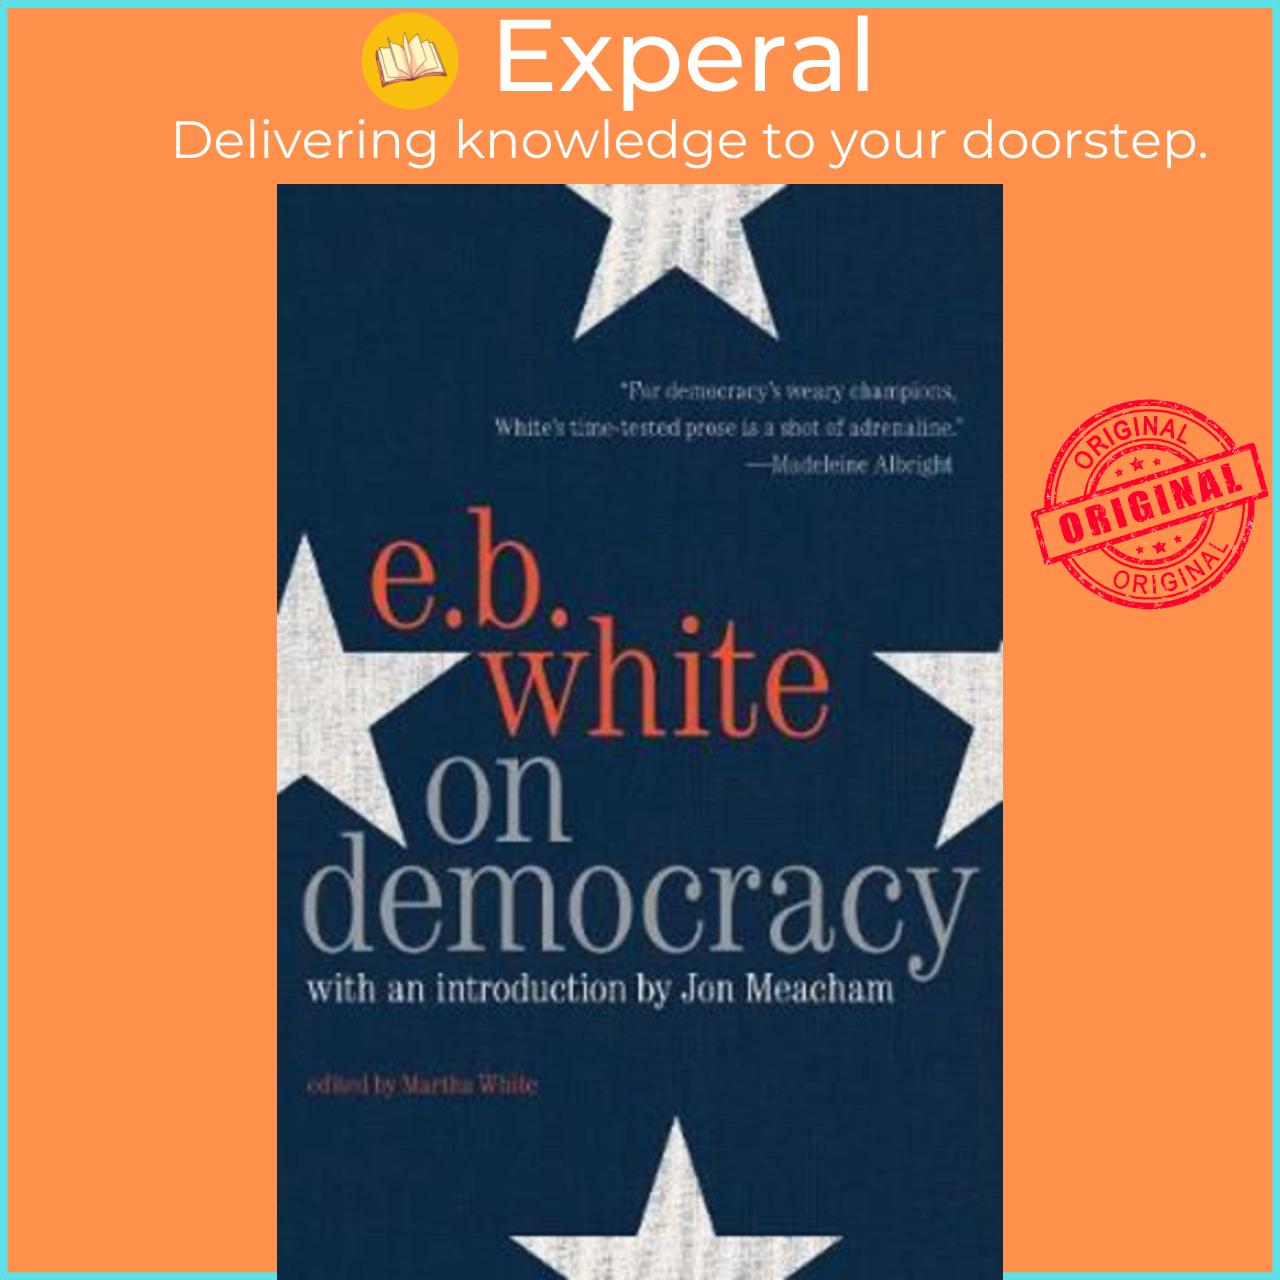 Sách - On Democracy by E. B White (US edition, hardcover)